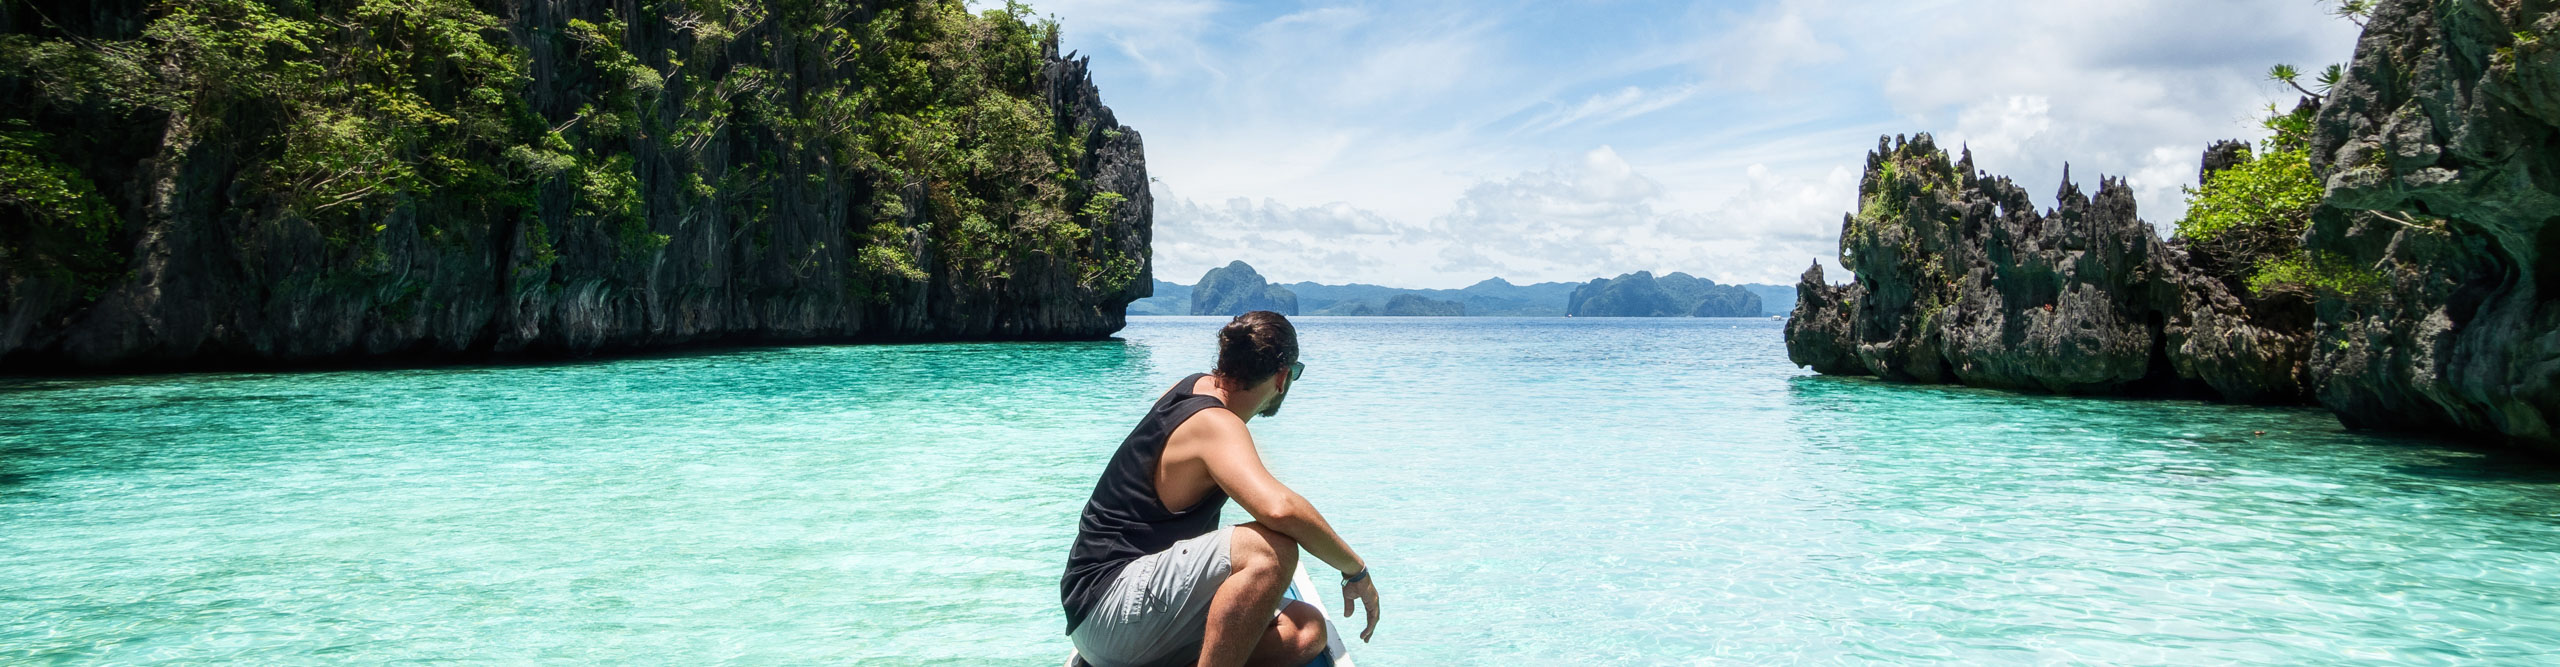 El Nido, Palawan, Philippines, traveler sitting on boat with sparkling turquoise water on sunny day.